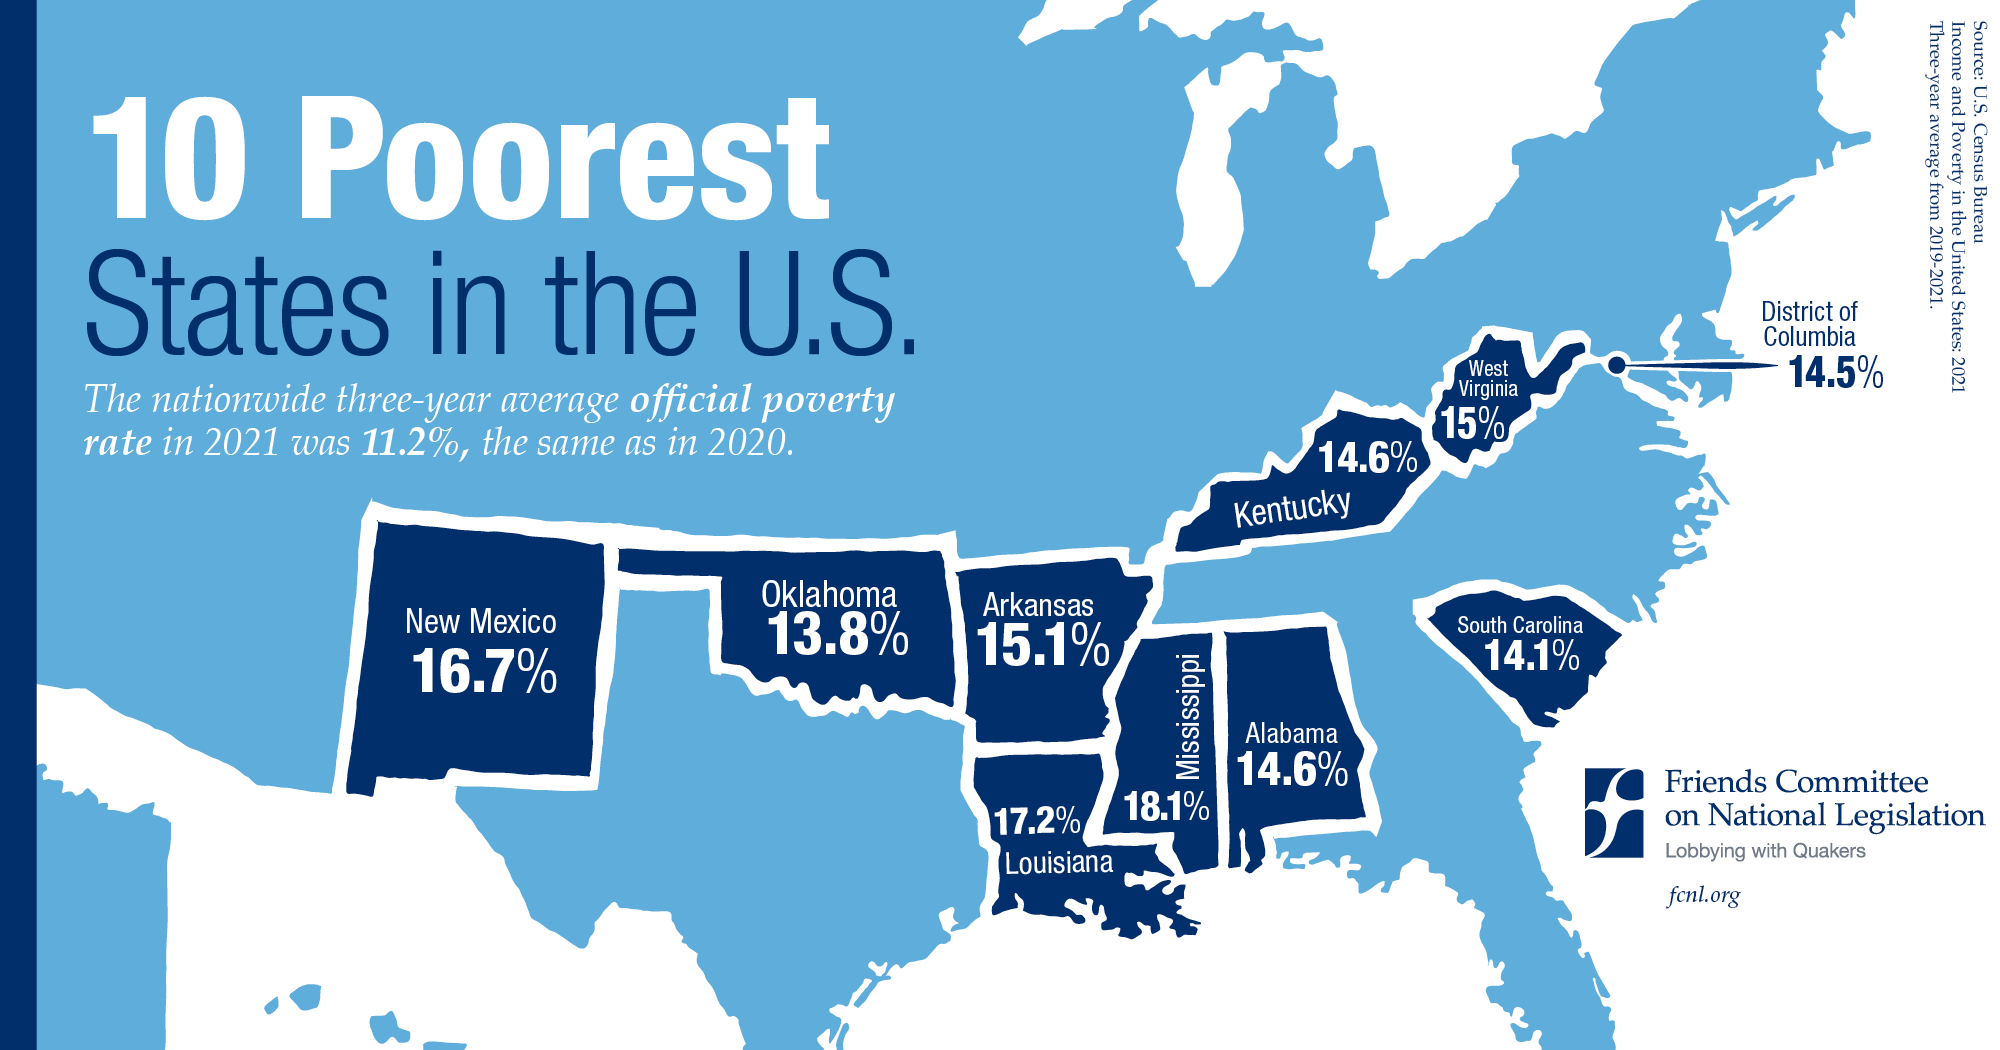 What is the poorest state in the United States?